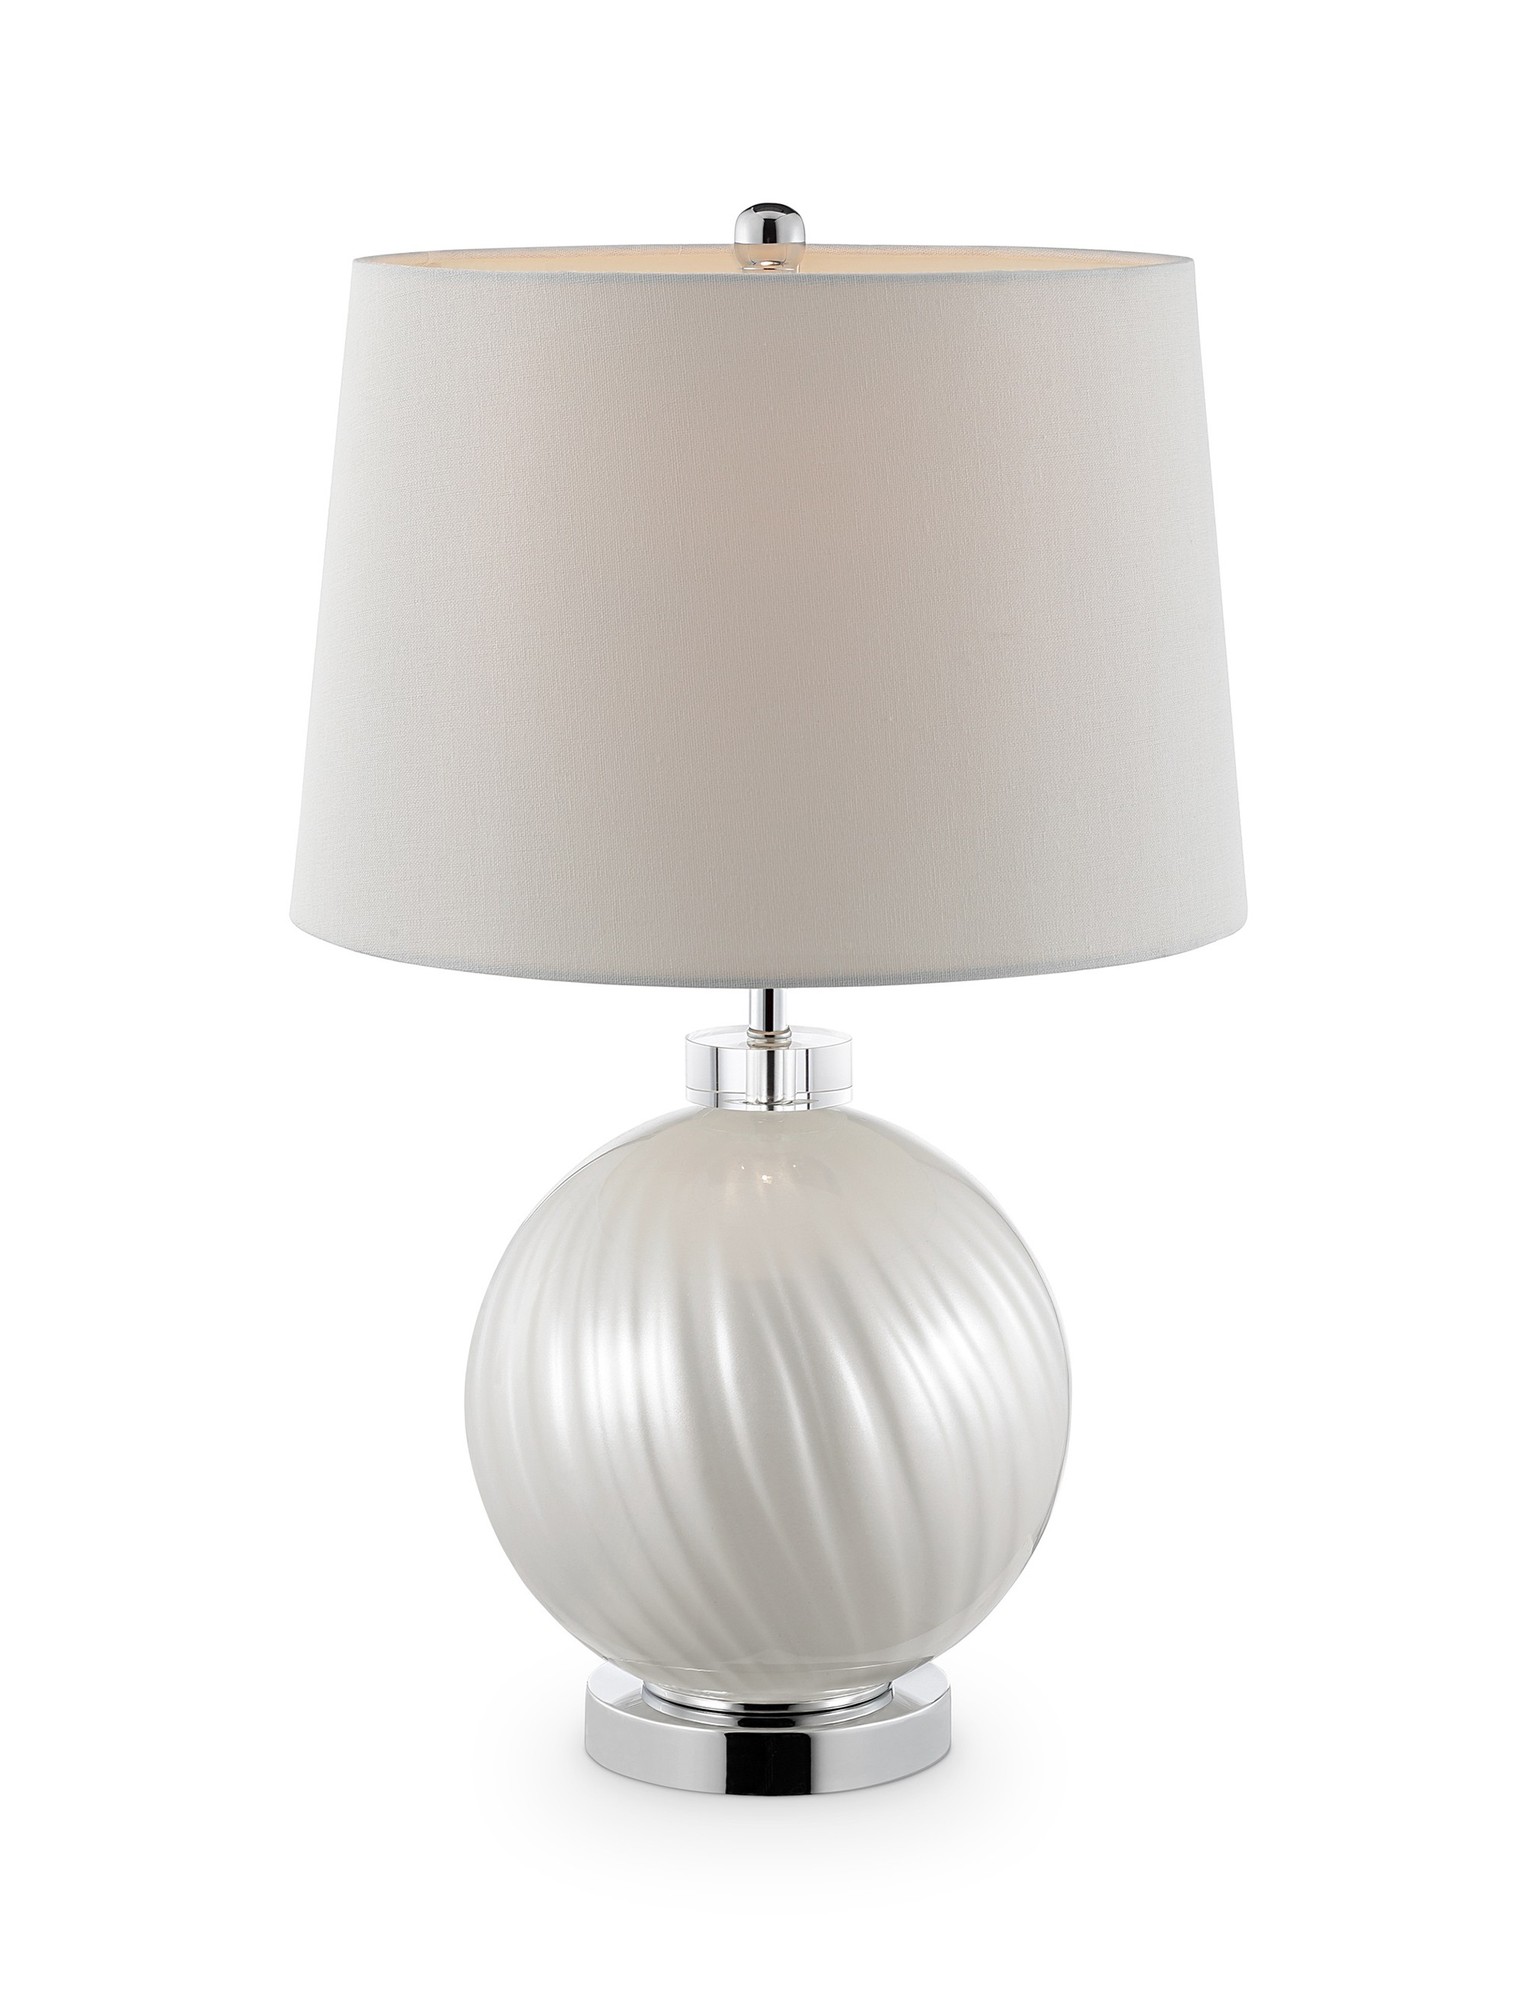 Pearlescent Globe Table Lamp with White Fabric Shade